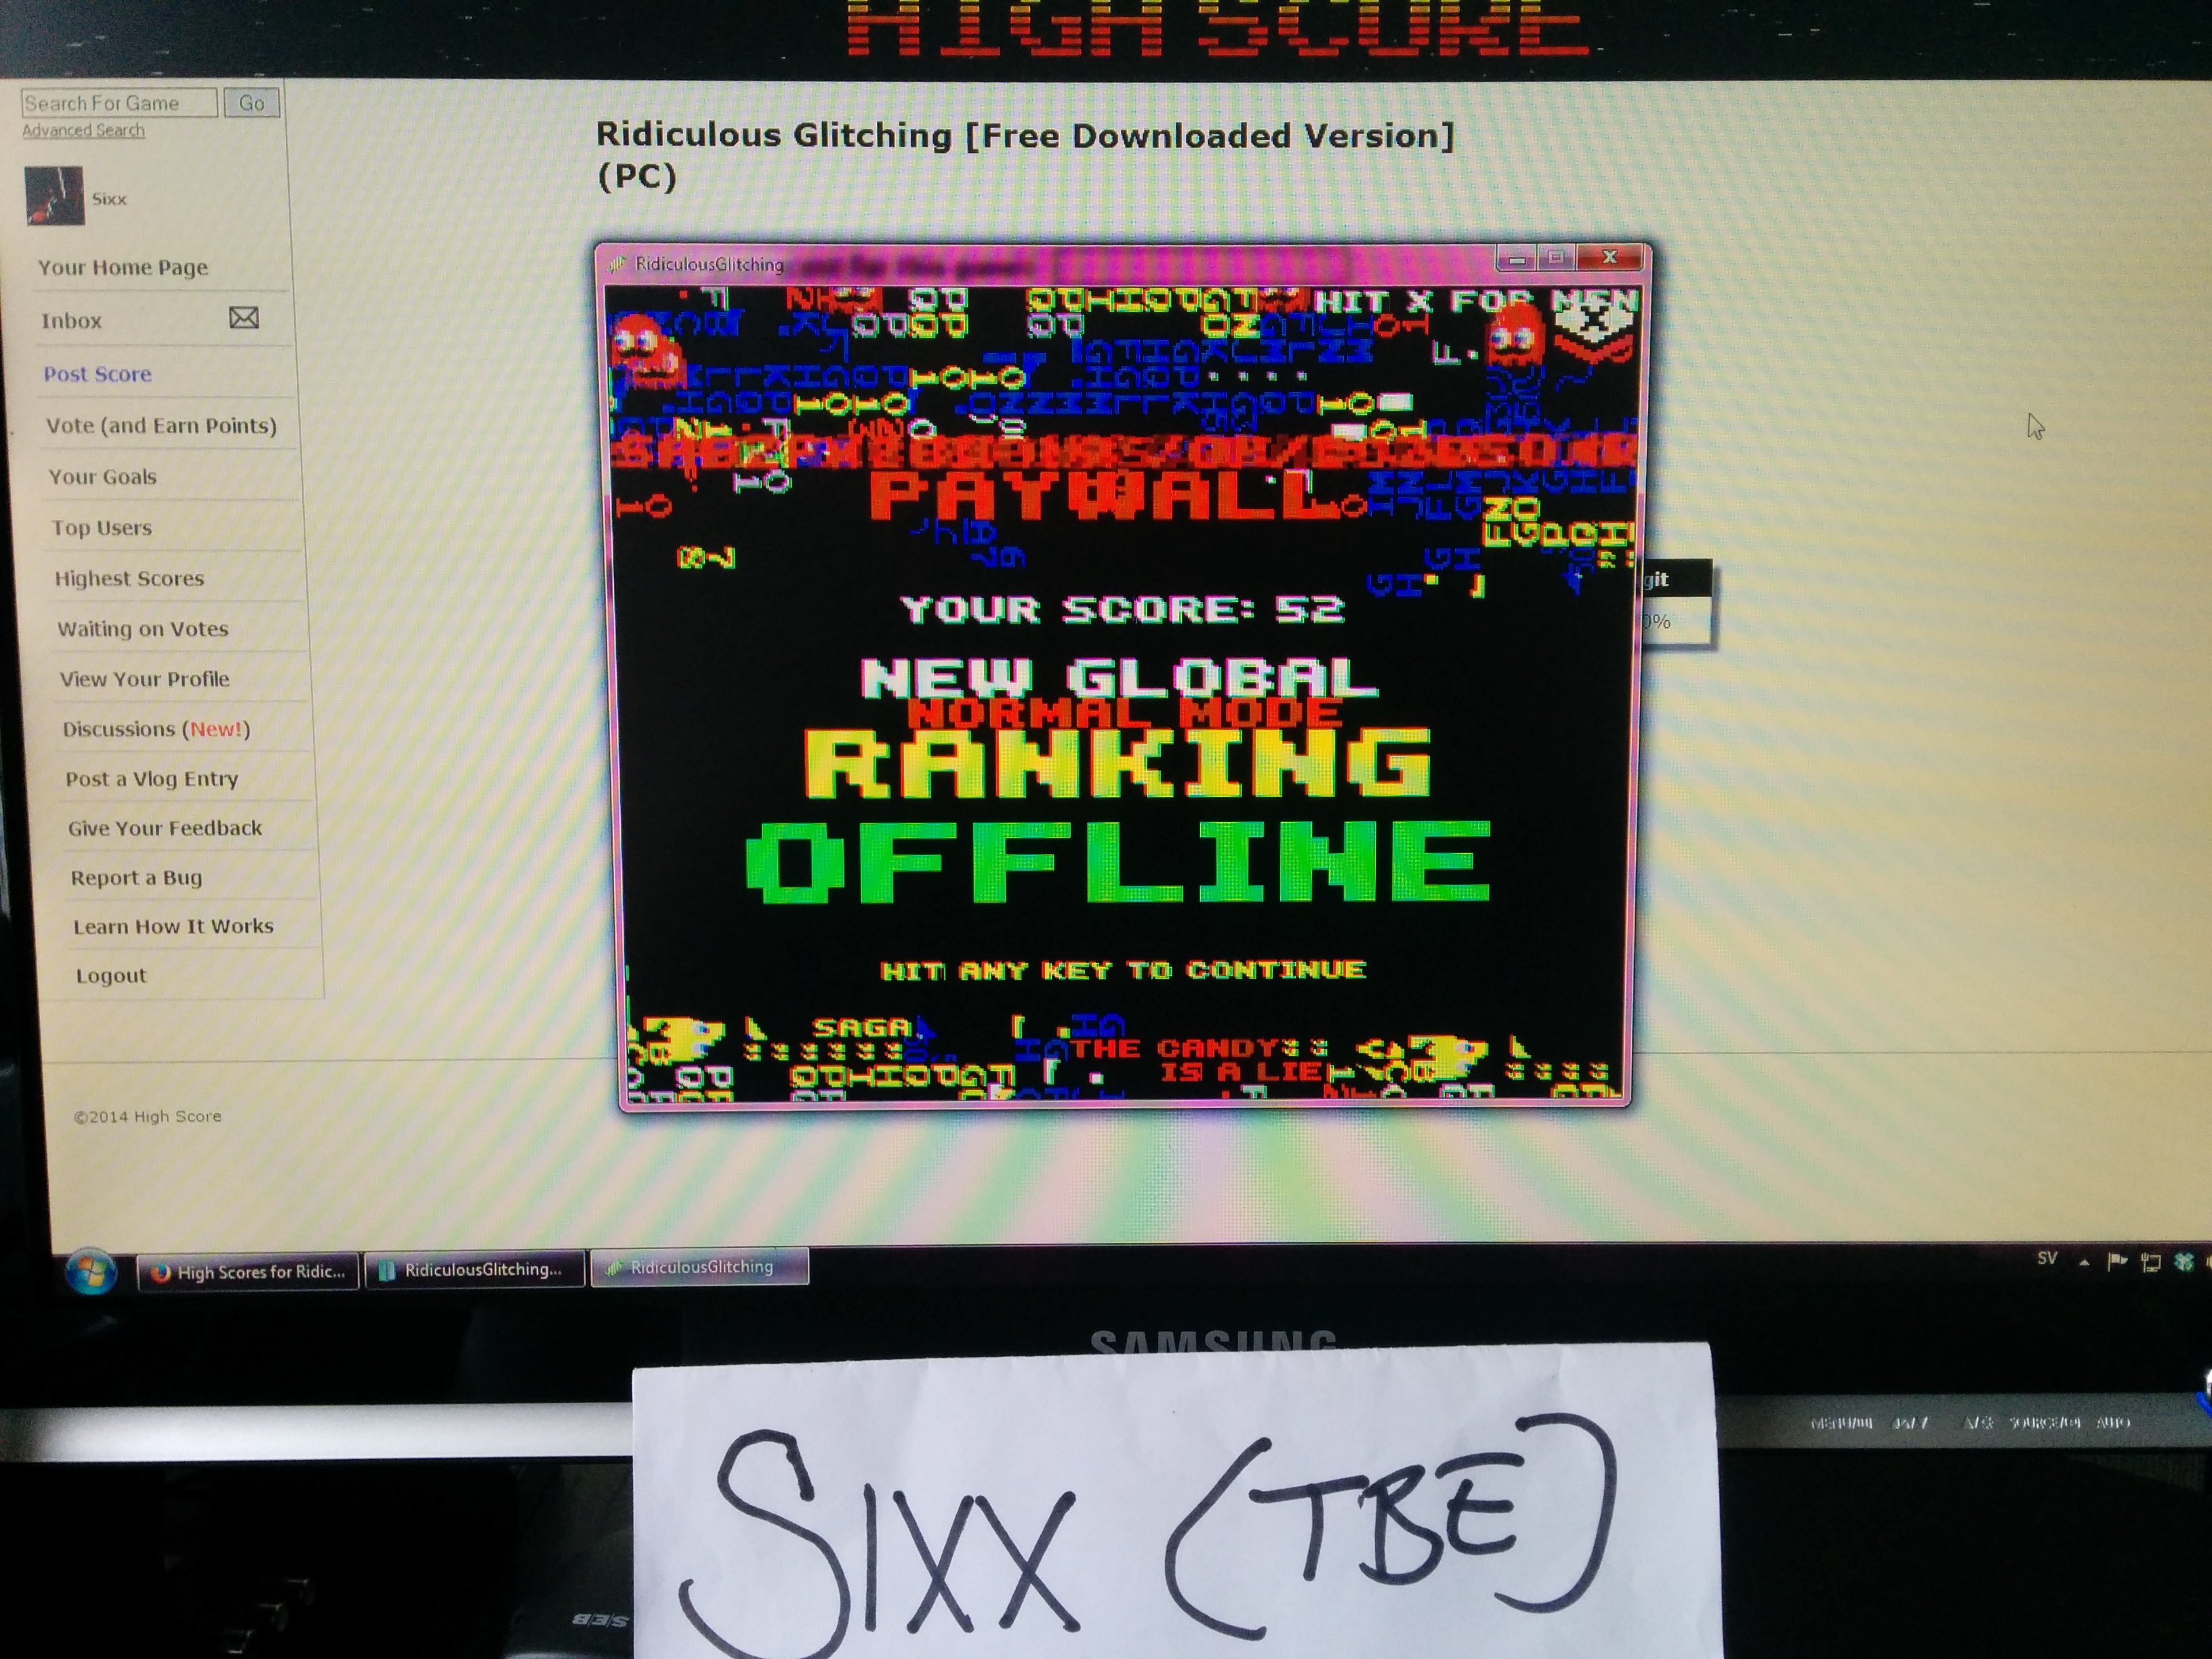 Sixx: Ridiculous Glitching [Free Downloaded Version] (PC) 52 points on 2014-06-06 04:05:39